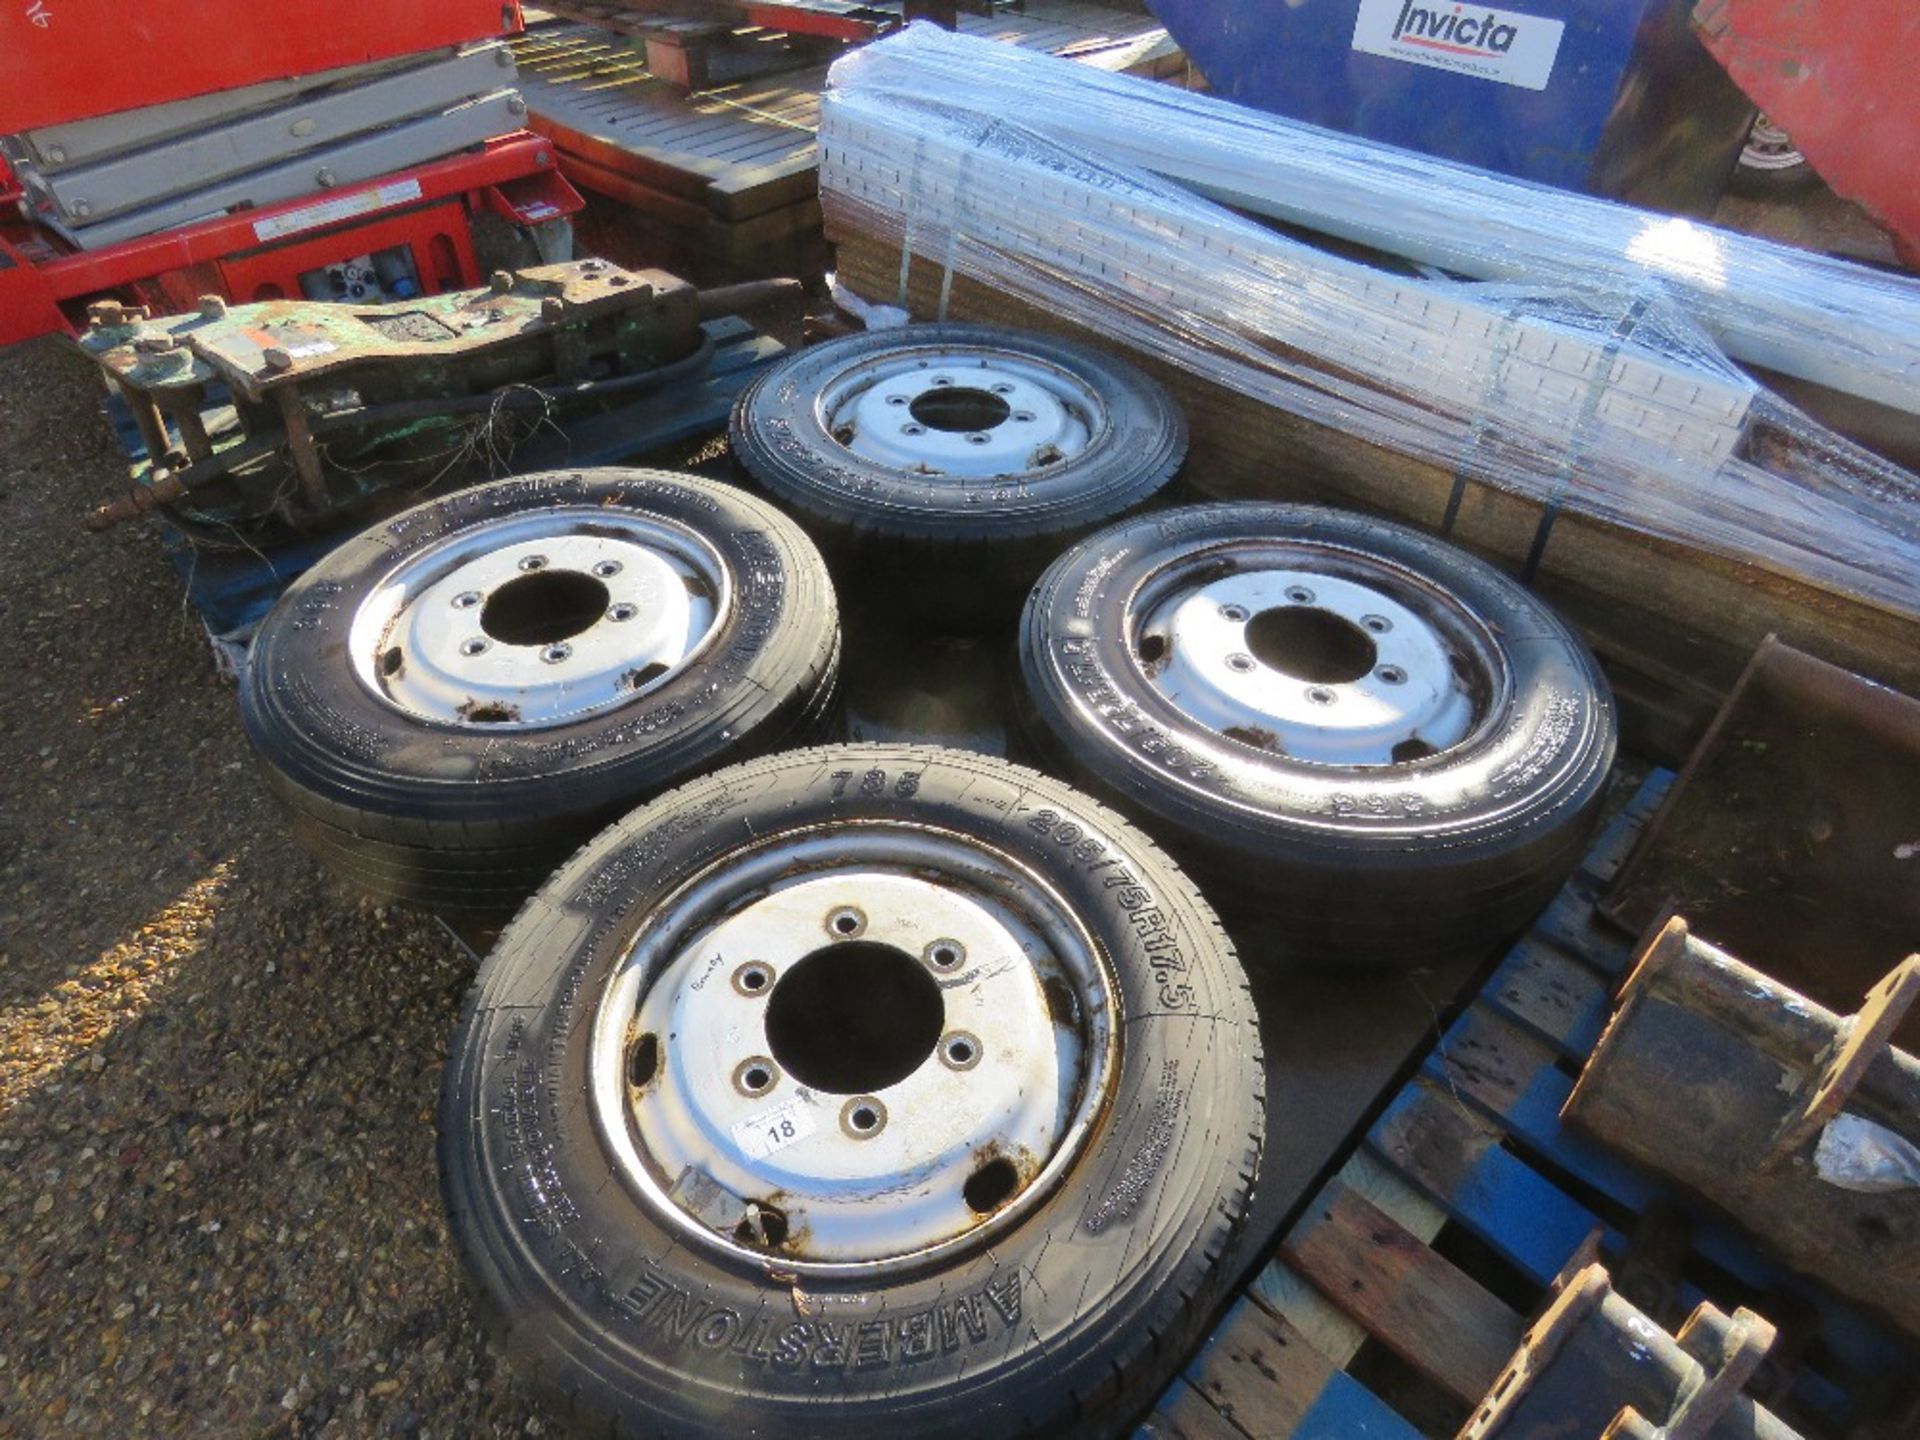 4 X 6 STUD WHEELS AND TYRES, 205/75R17.5 SIZE TYRES. NO VAT ON HAMMER PRICE.